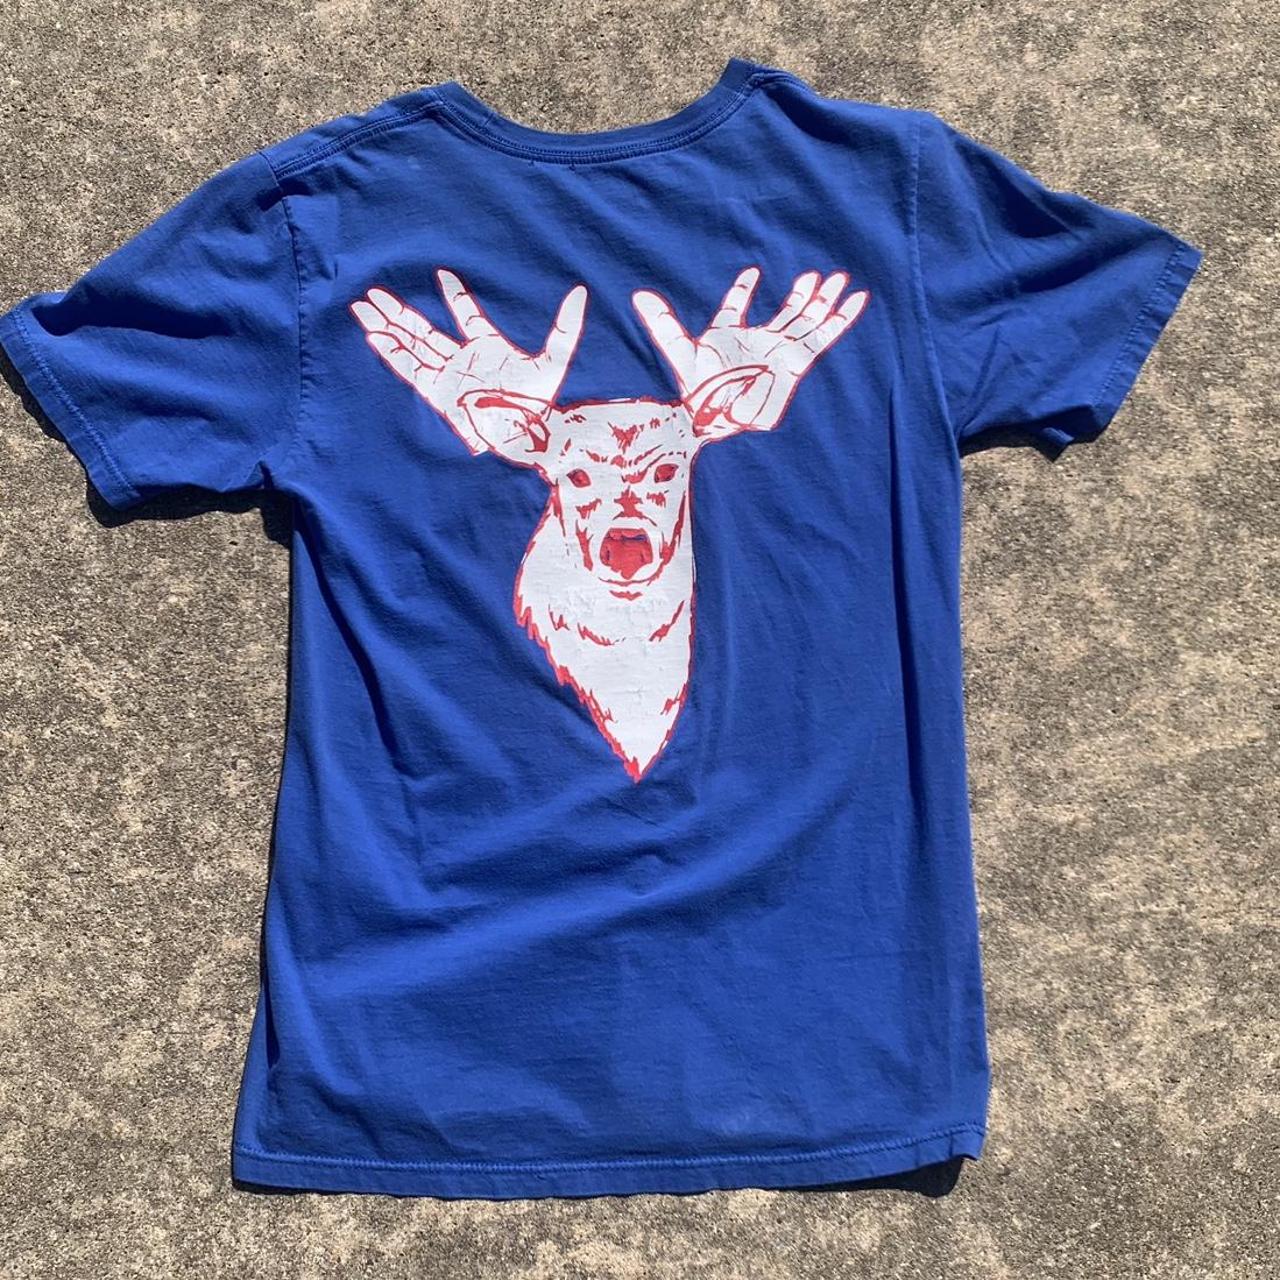 Nike Texas Rangers T Shirt 2010 Claw Antlers Graphic Tee Used Men’s Size m